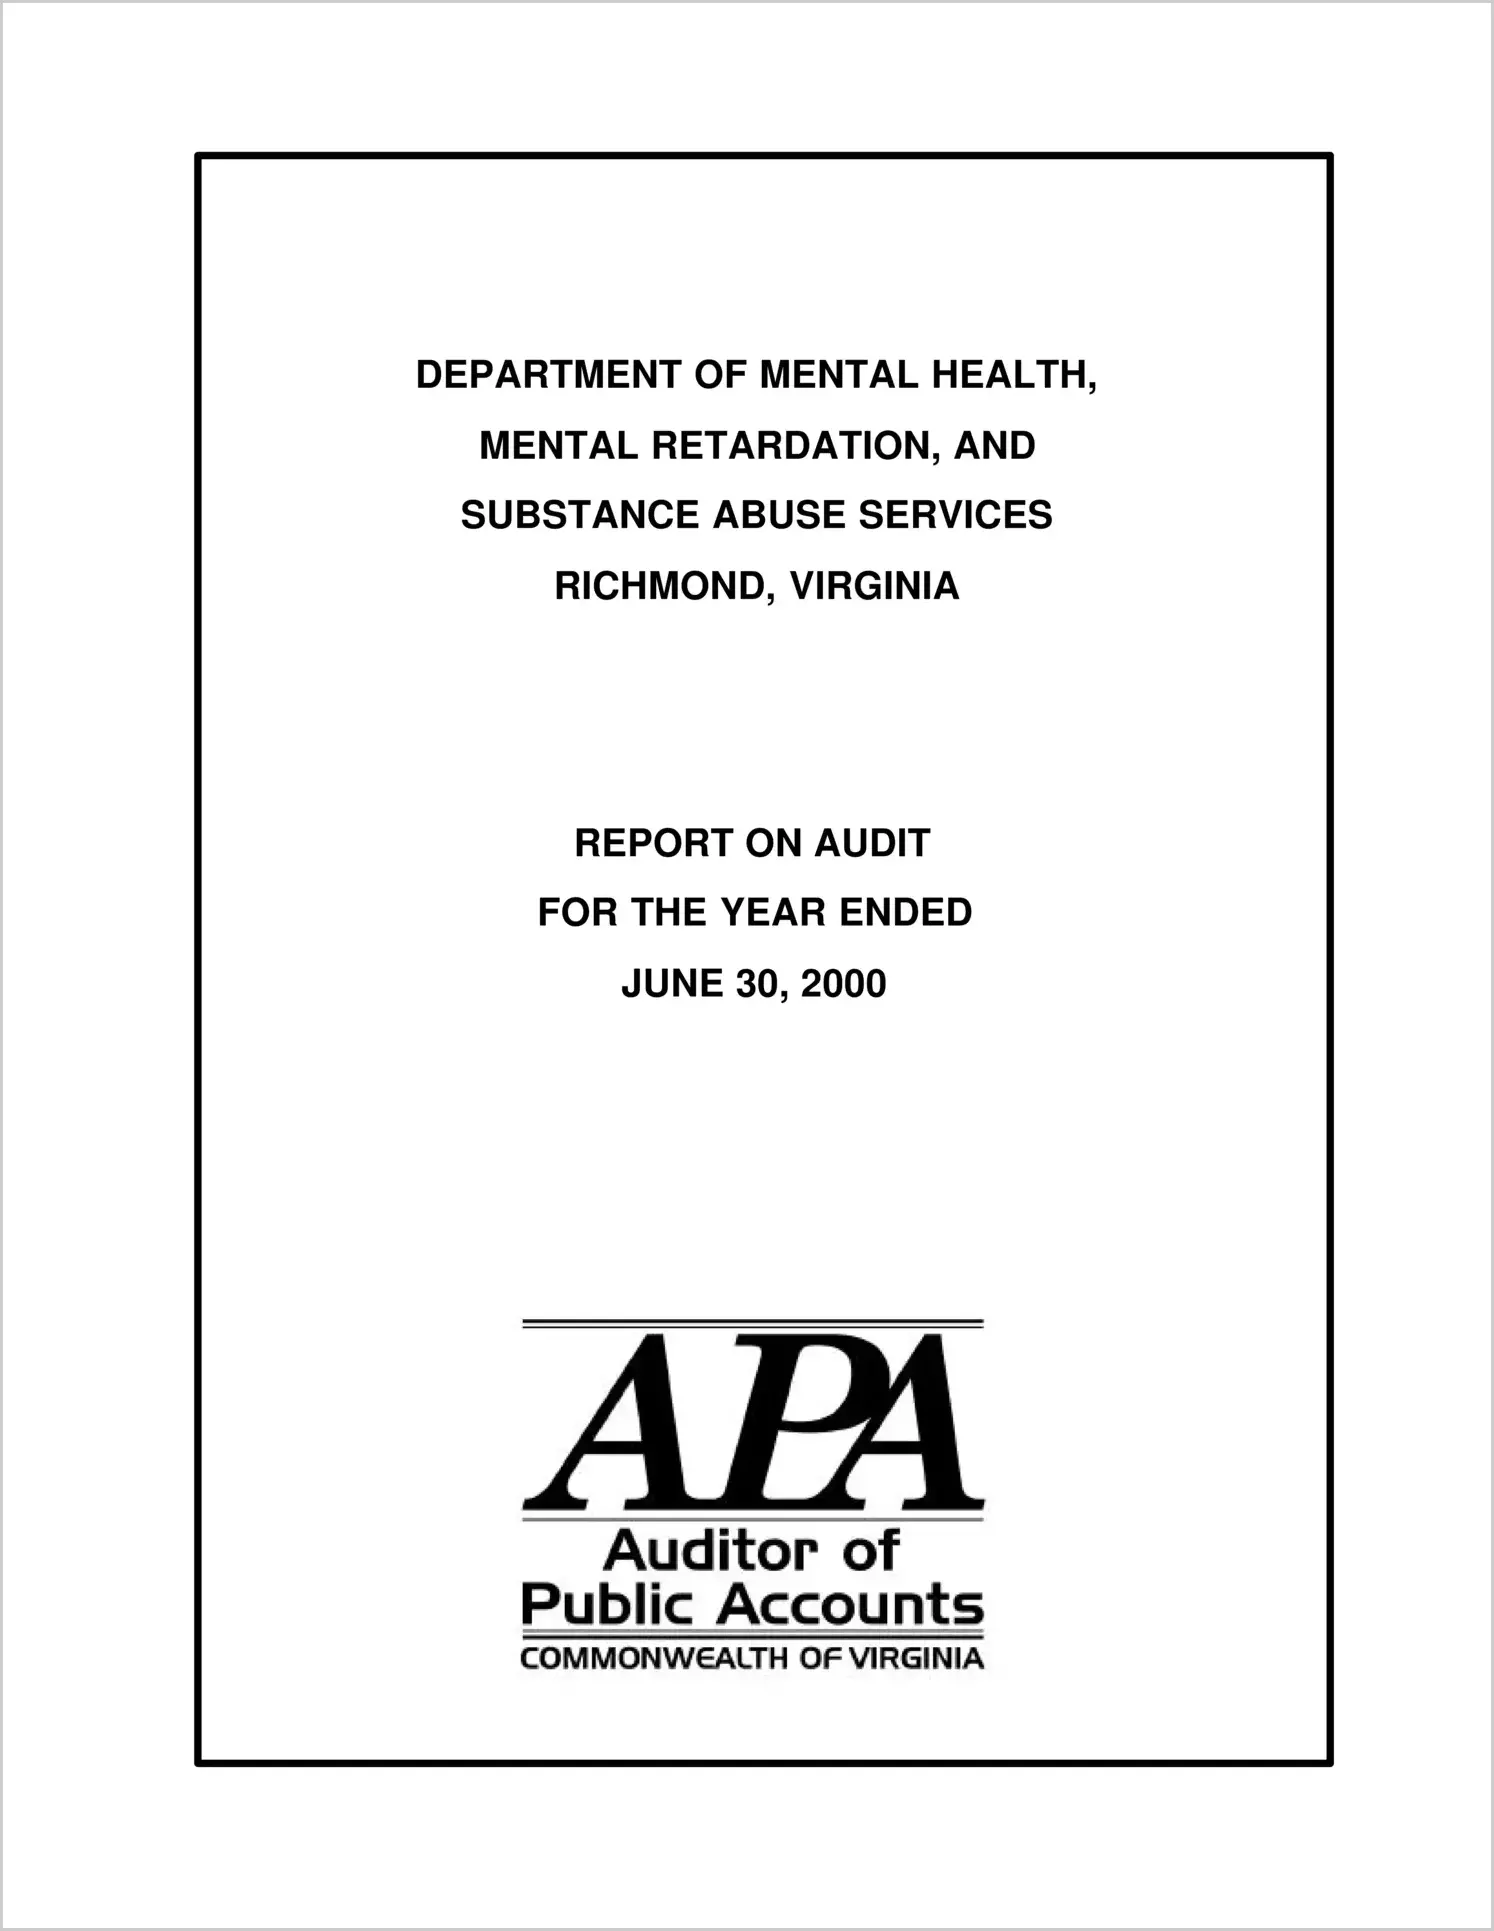 Department of Mental Health, Mental Retardation, and Substance Abuse Services for the year ended June 30, 2000